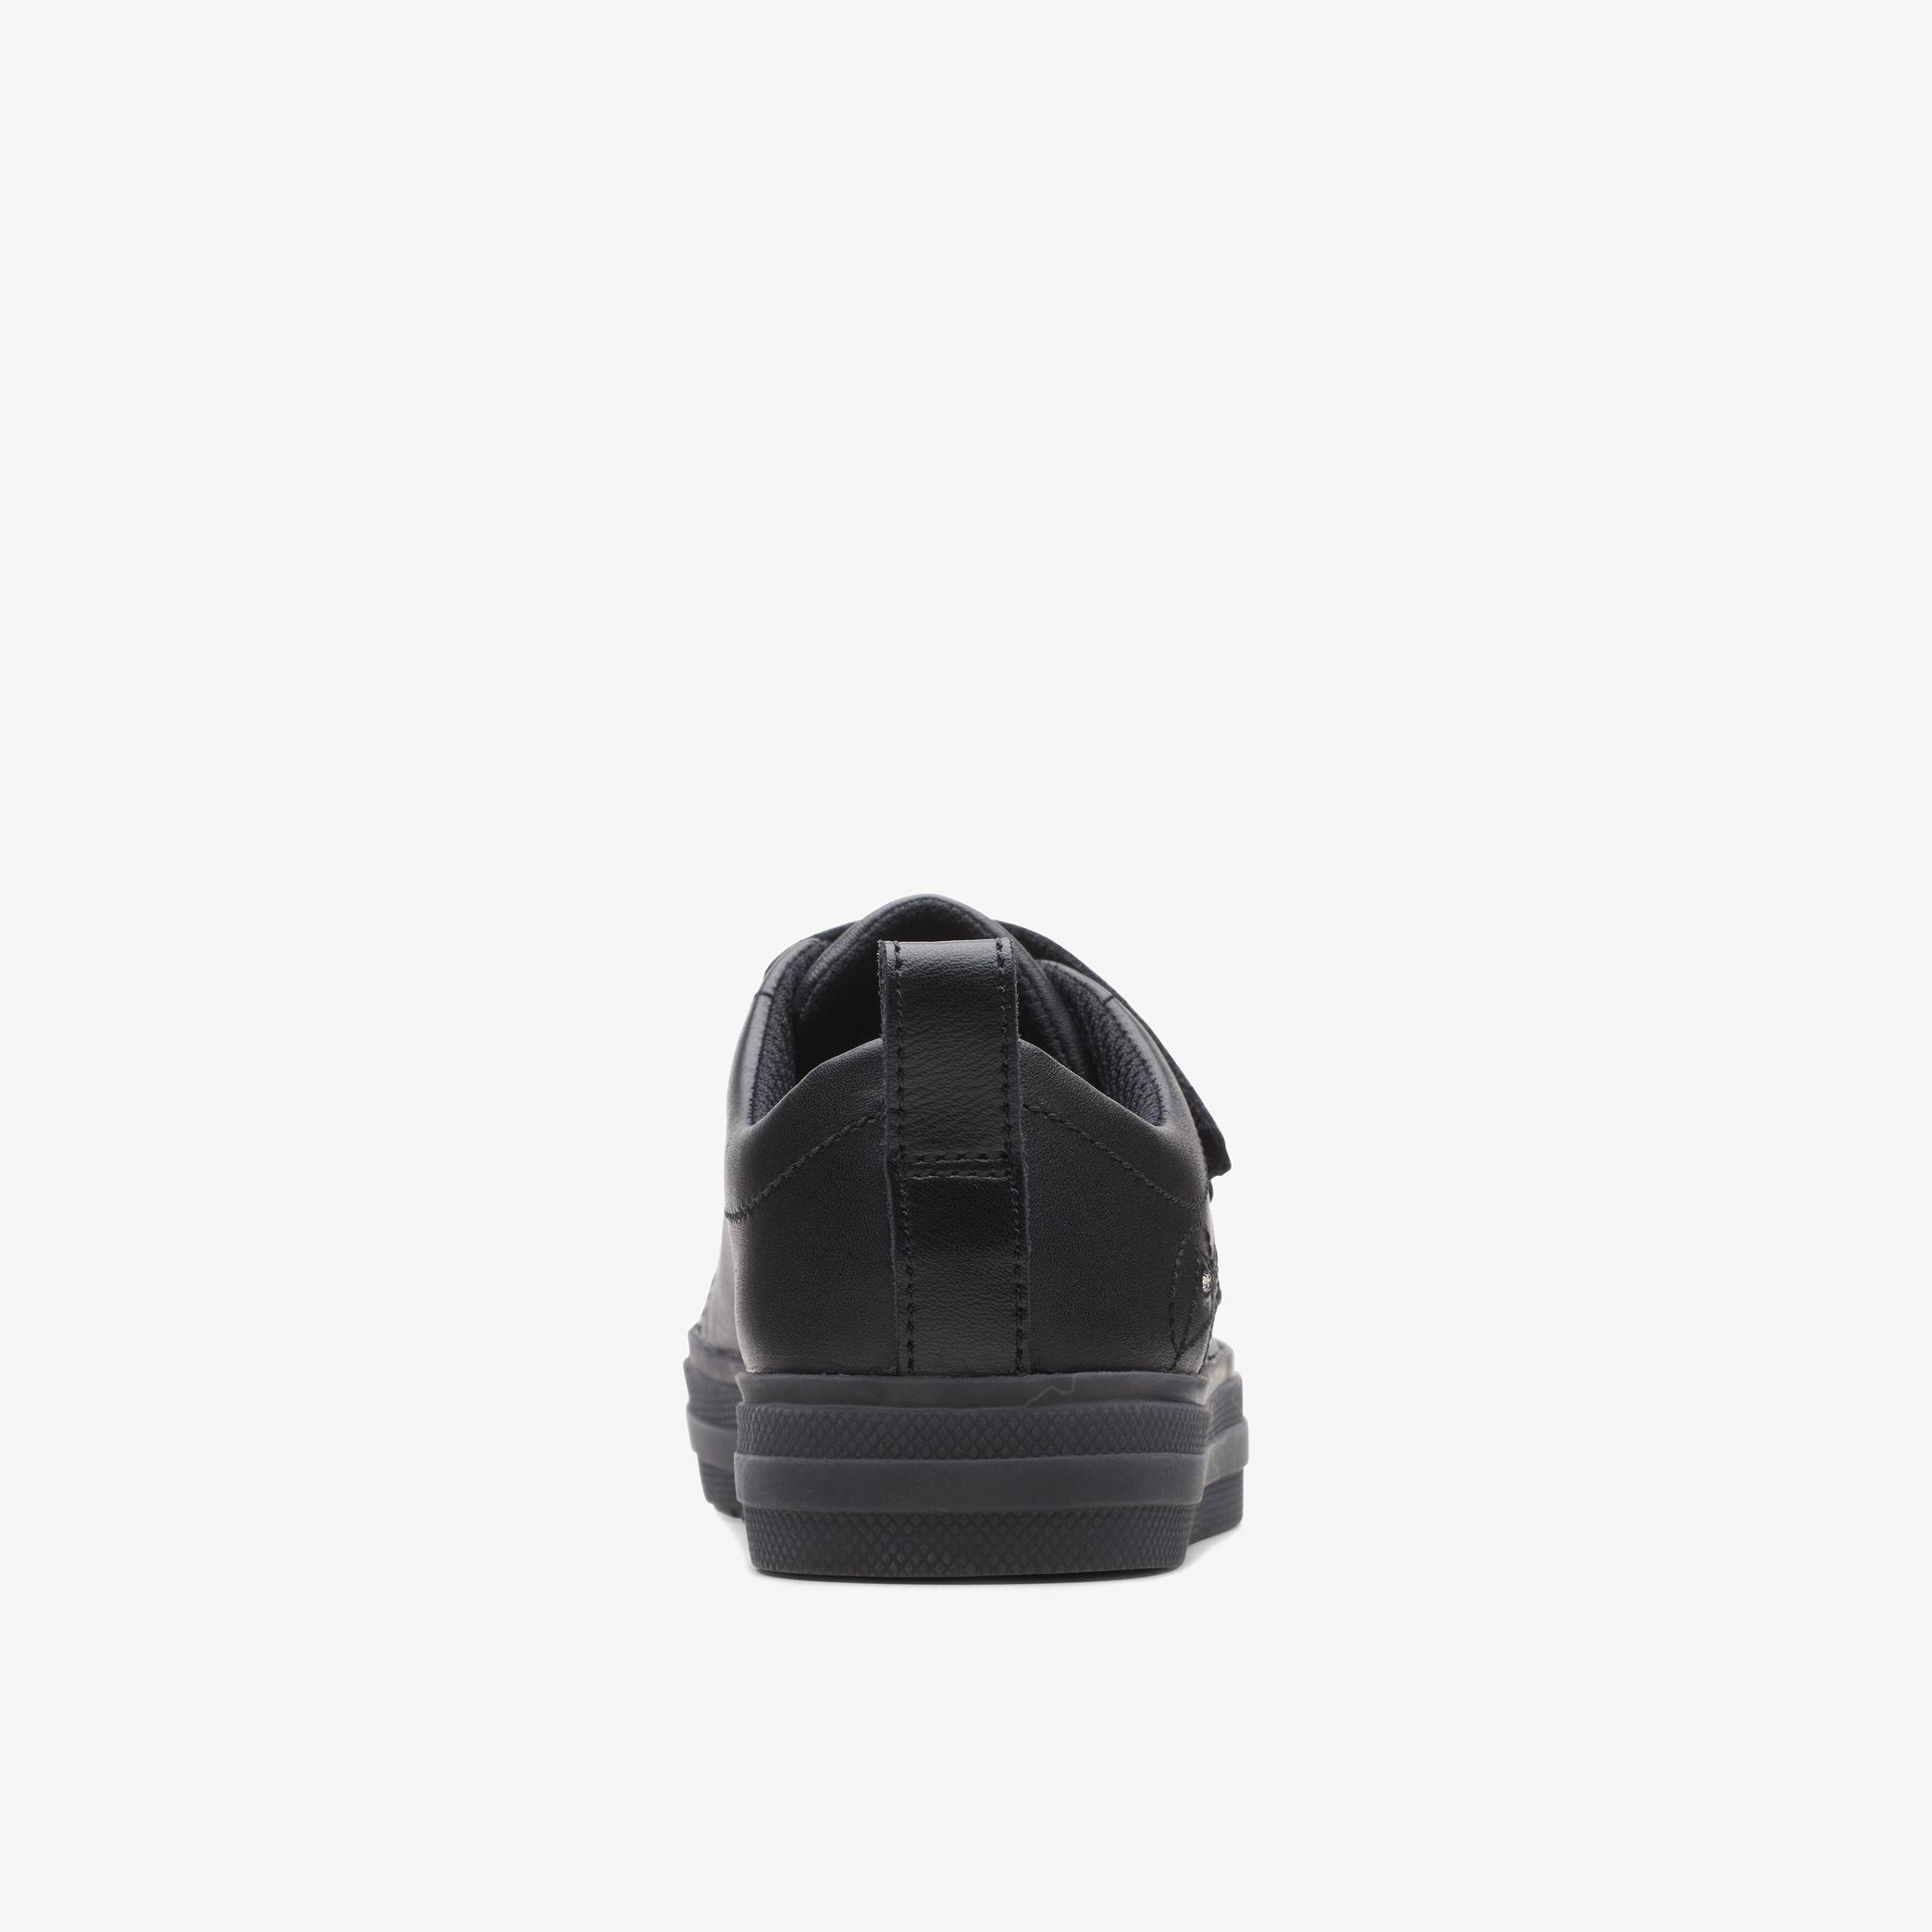 BOYS Flare Bright Kid Black Leather Trainers | Clarks Outlet